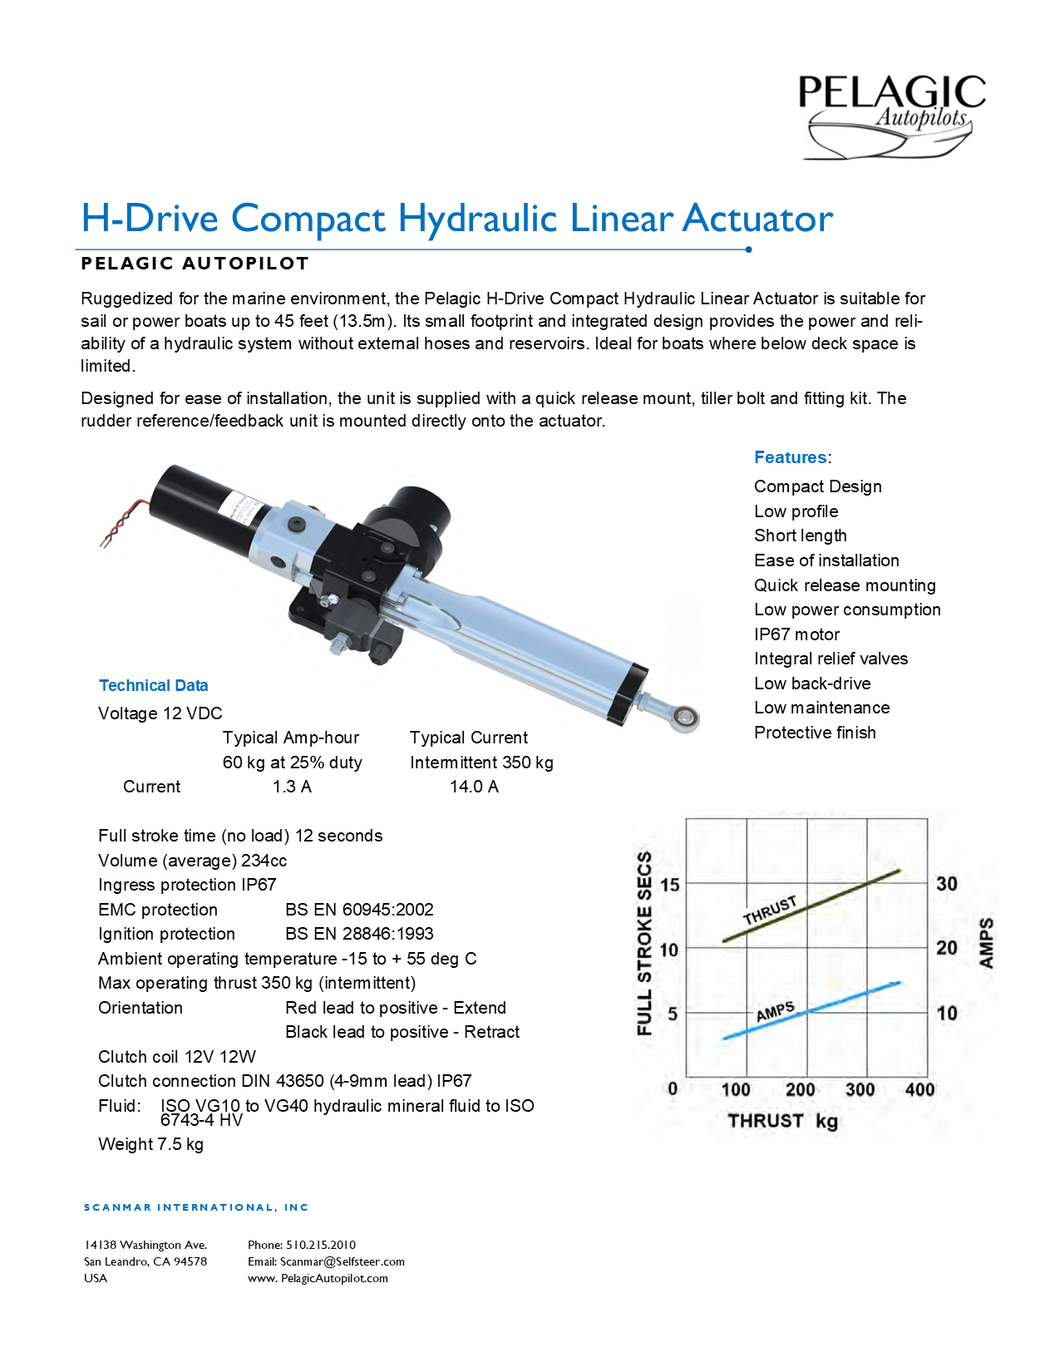 Hydraulic Linear Actuator - Compact - In stock, ships in 3 - 5